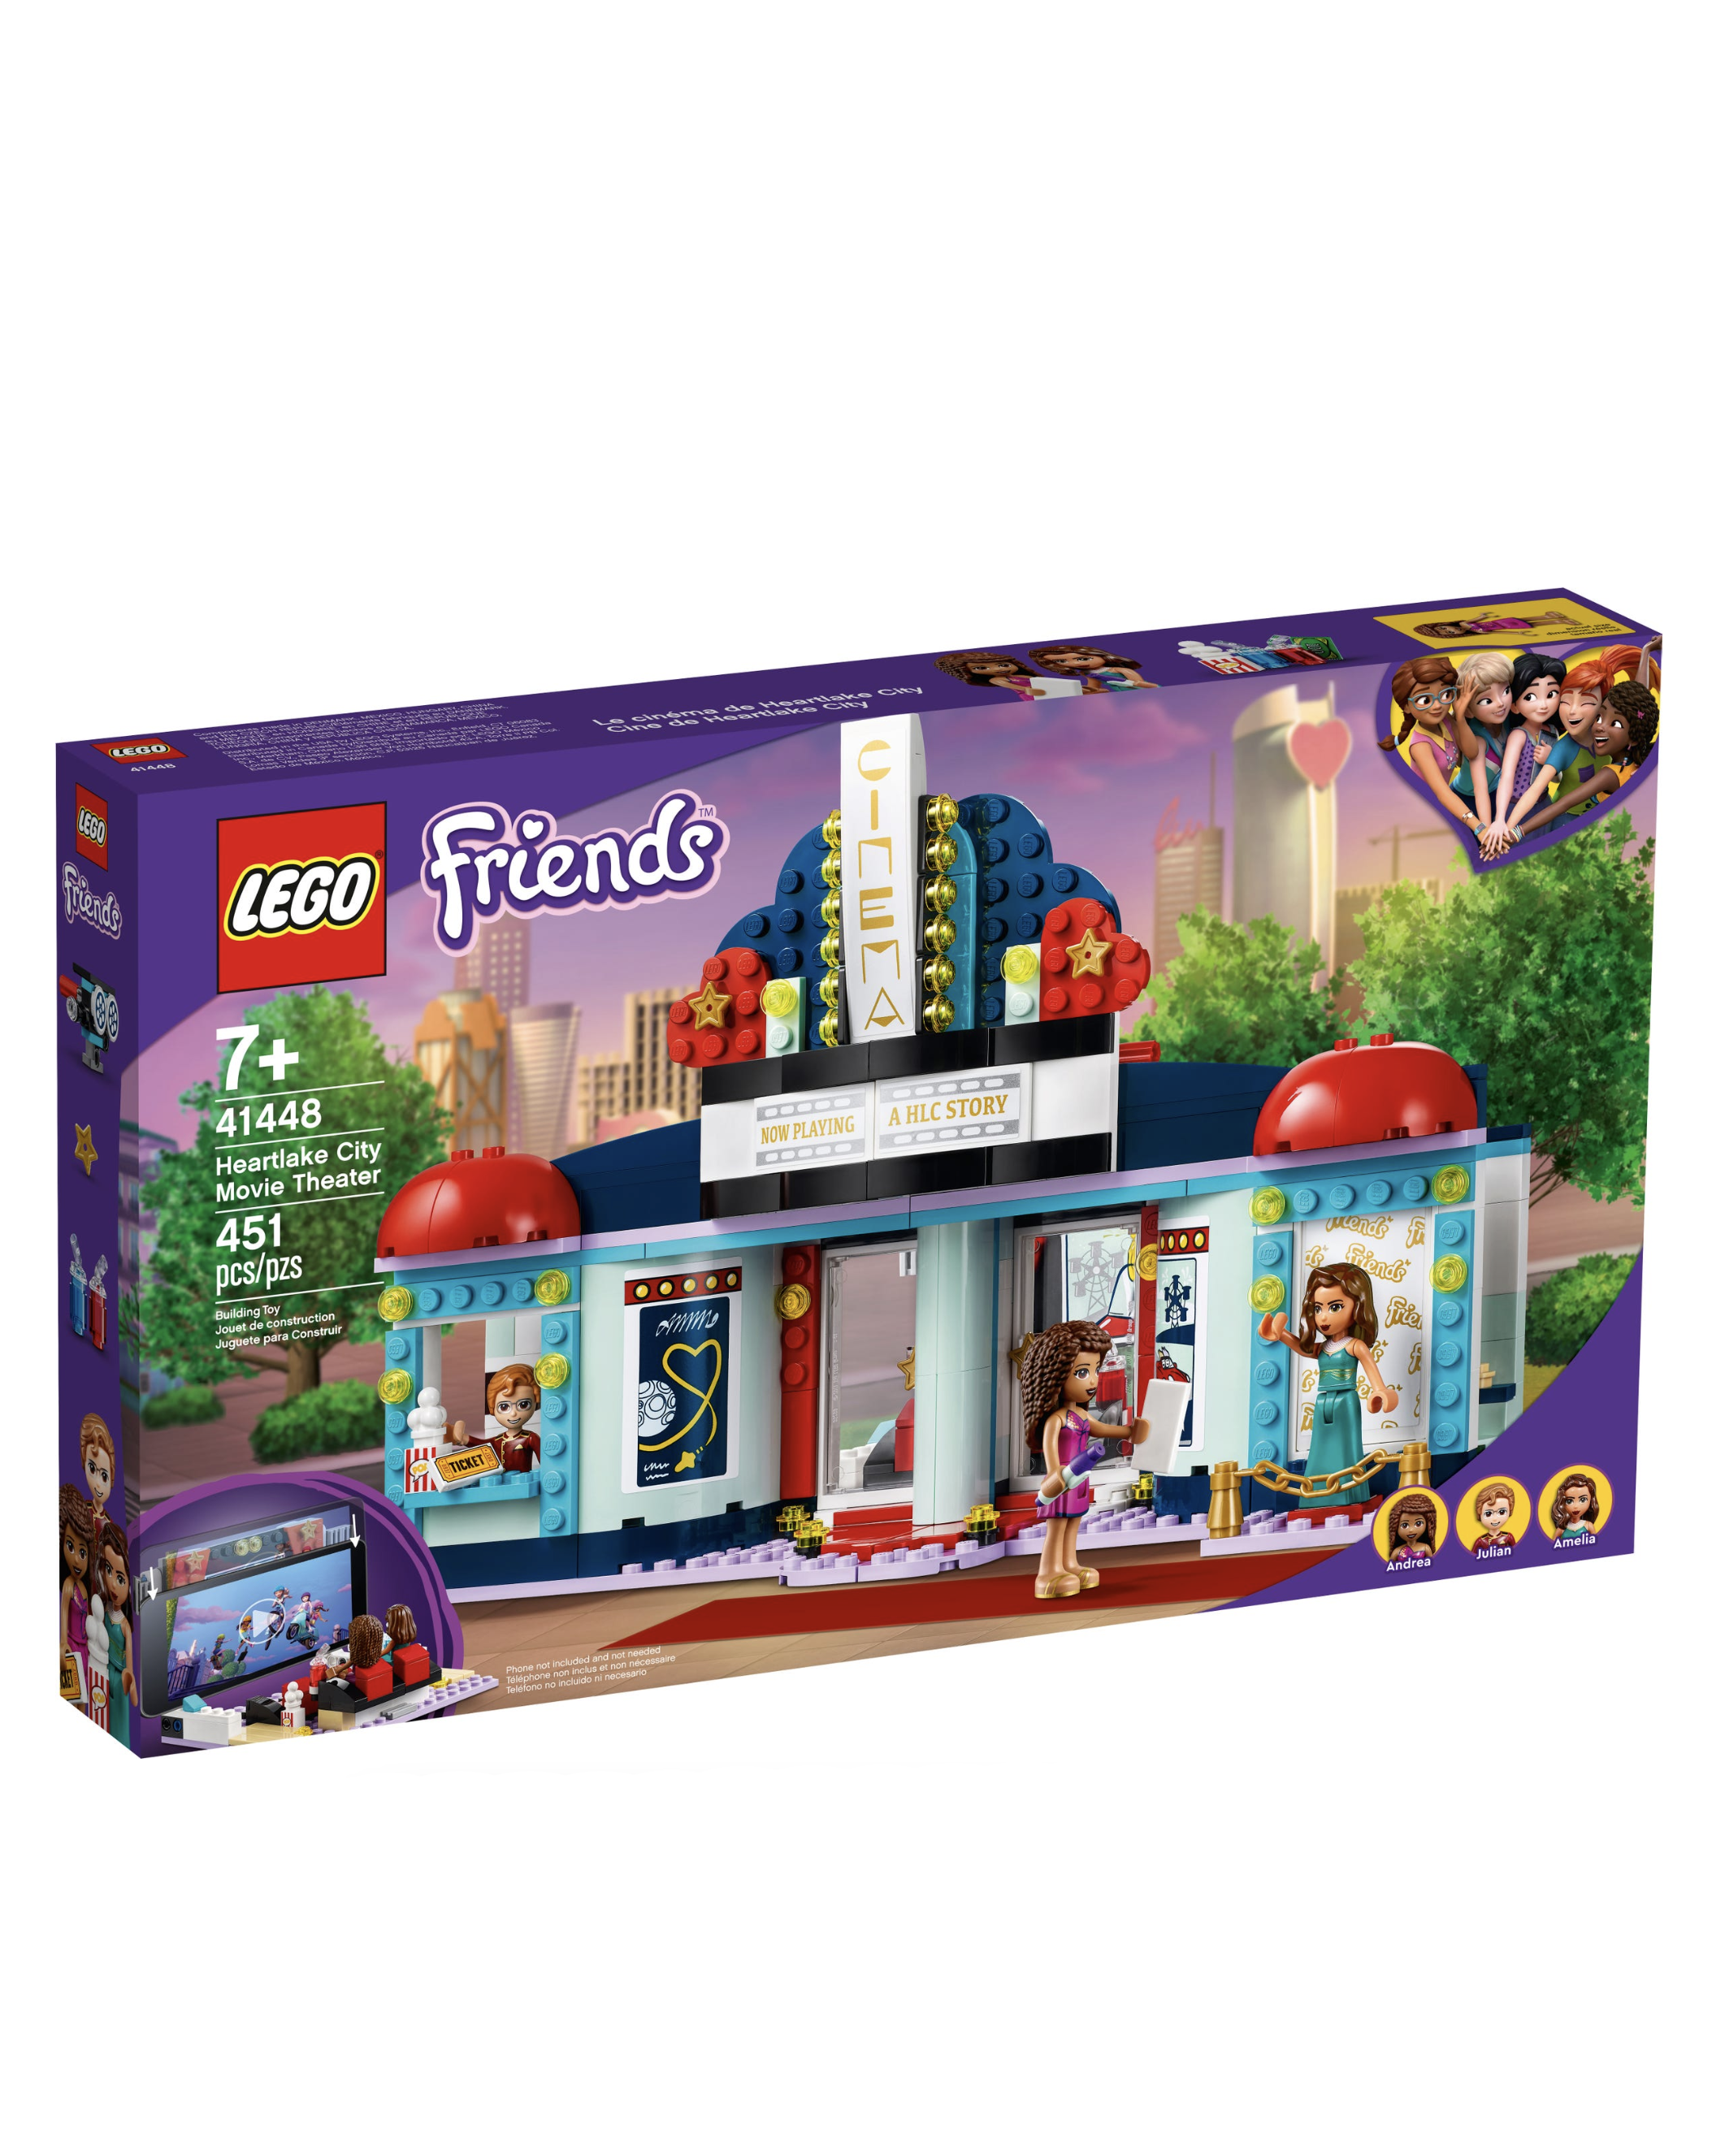 Heartlake City Movie Theater Store 41448 | Upstairs - The LEGO